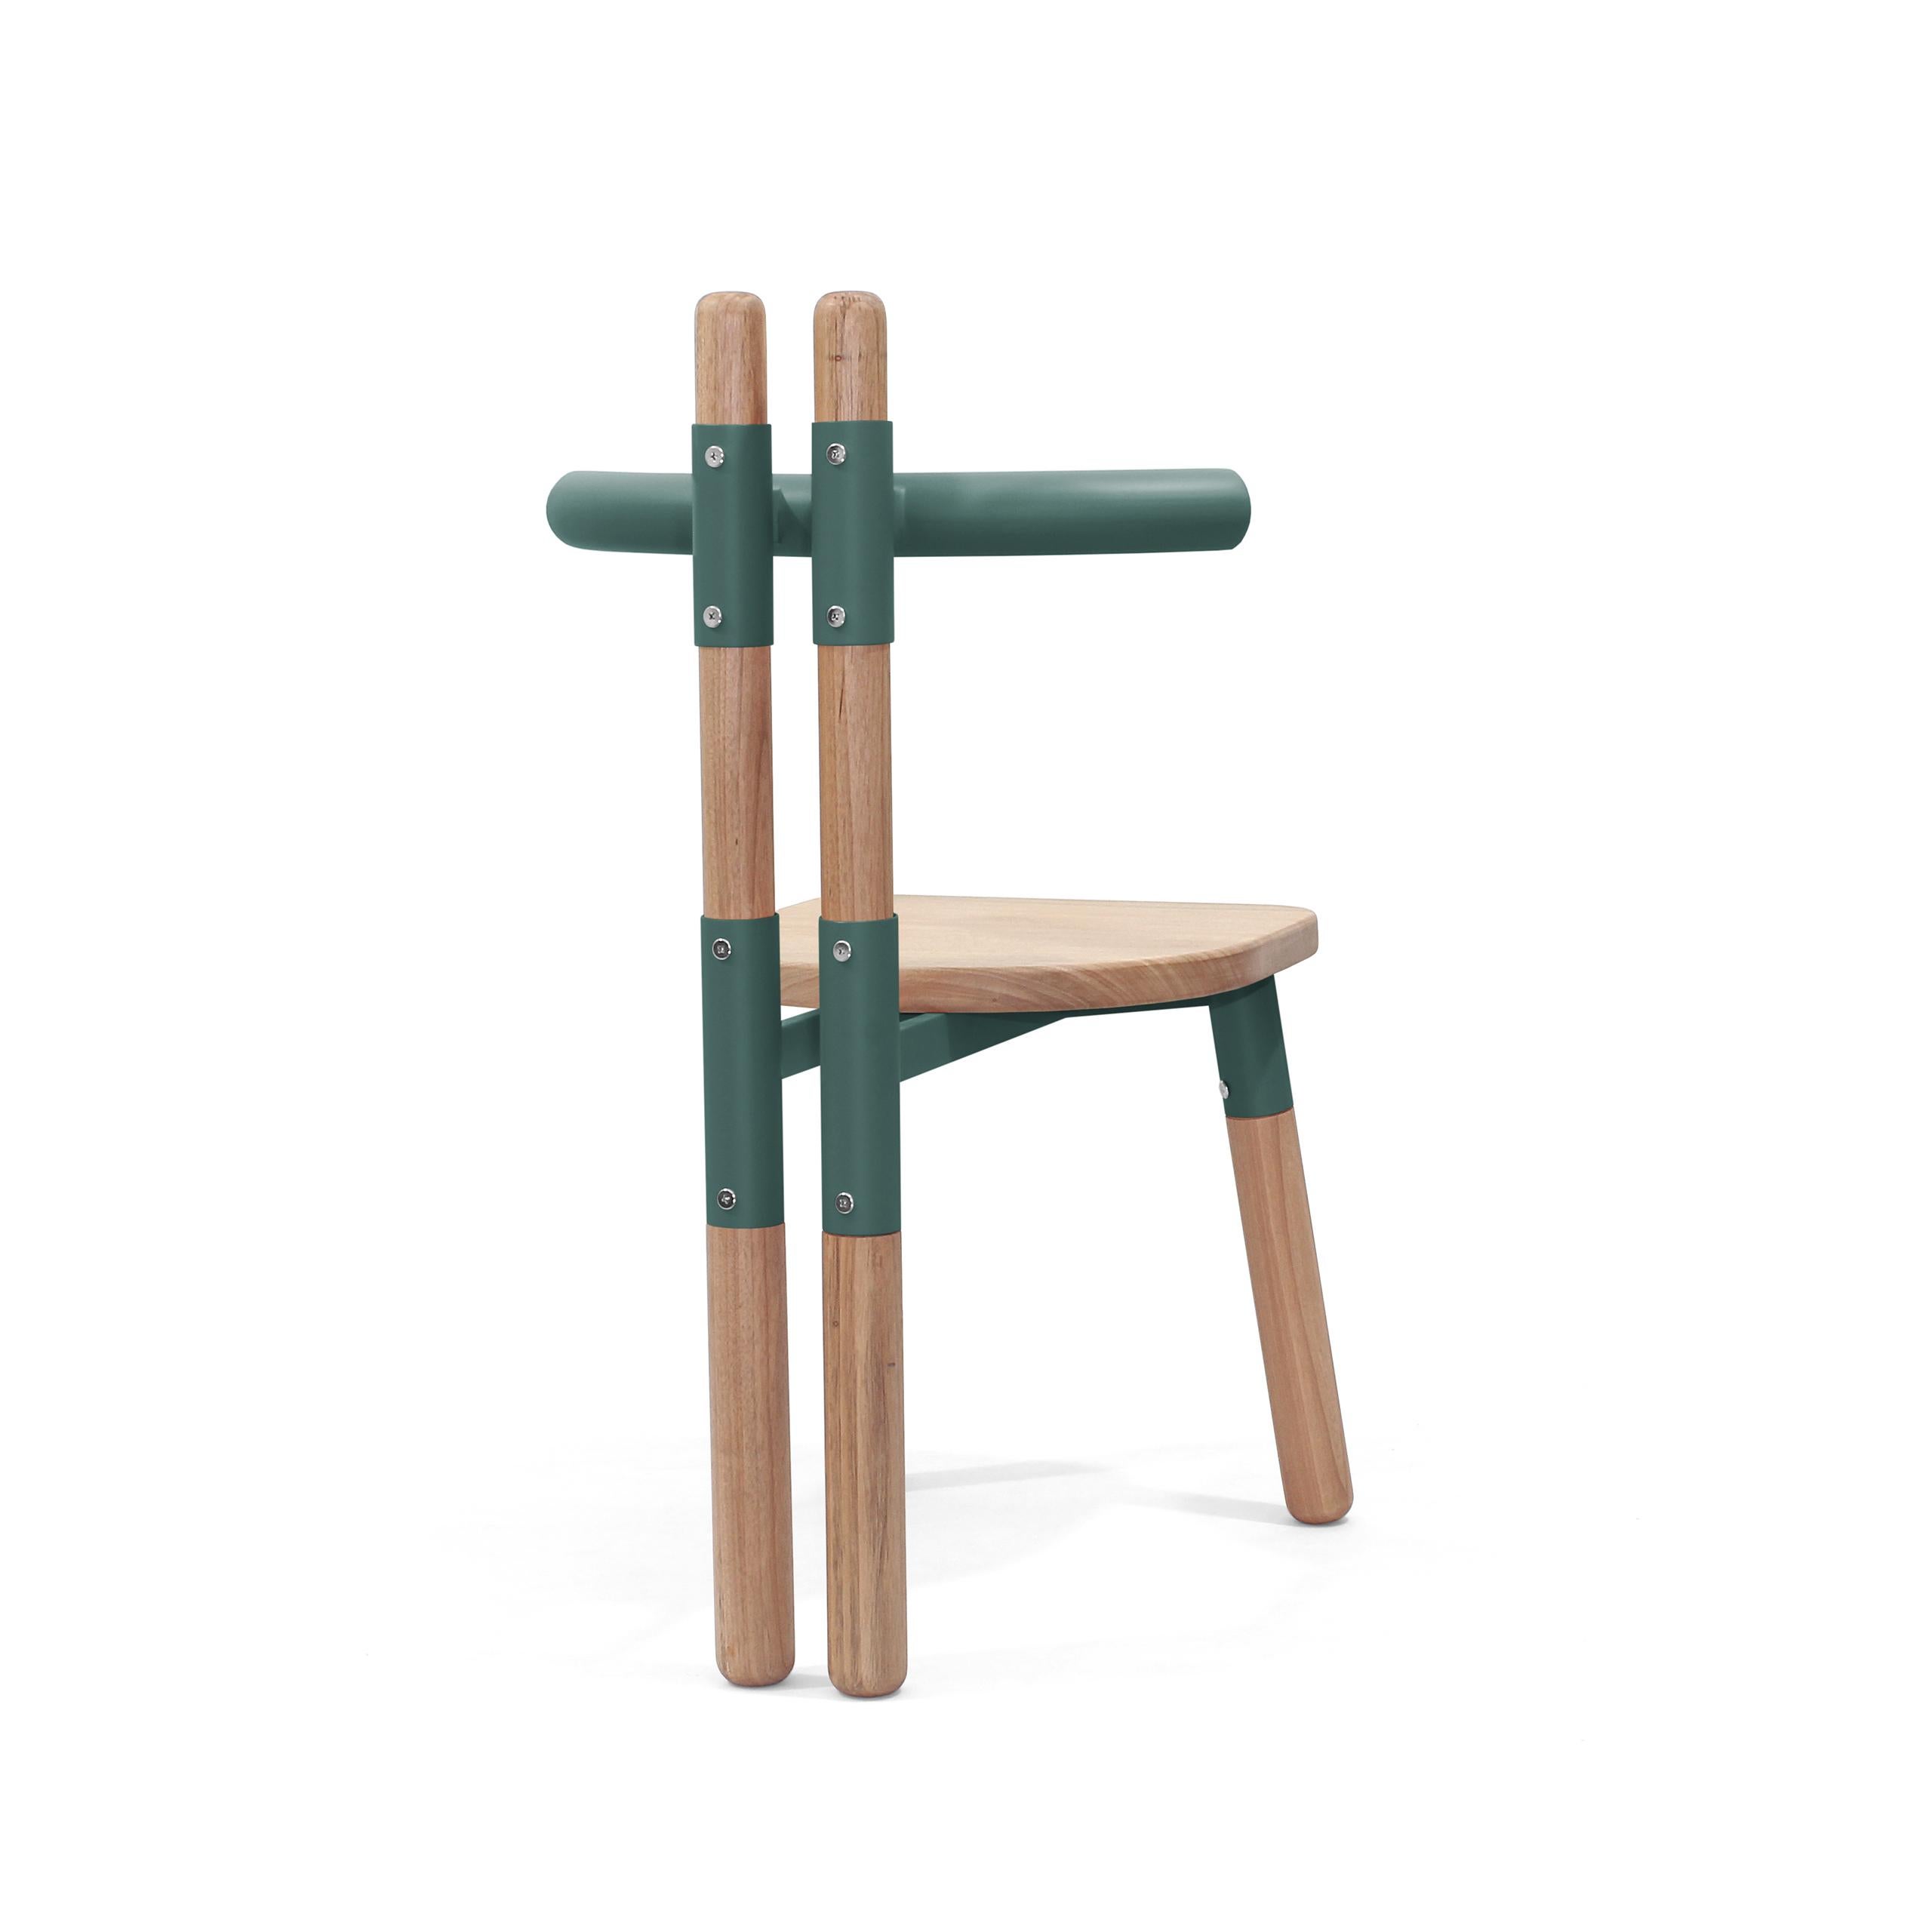 Contemporary Handmade PK12 Chair, Carbon Steel Structure & Turned Wood Legs by Paulo Kobylka For Sale